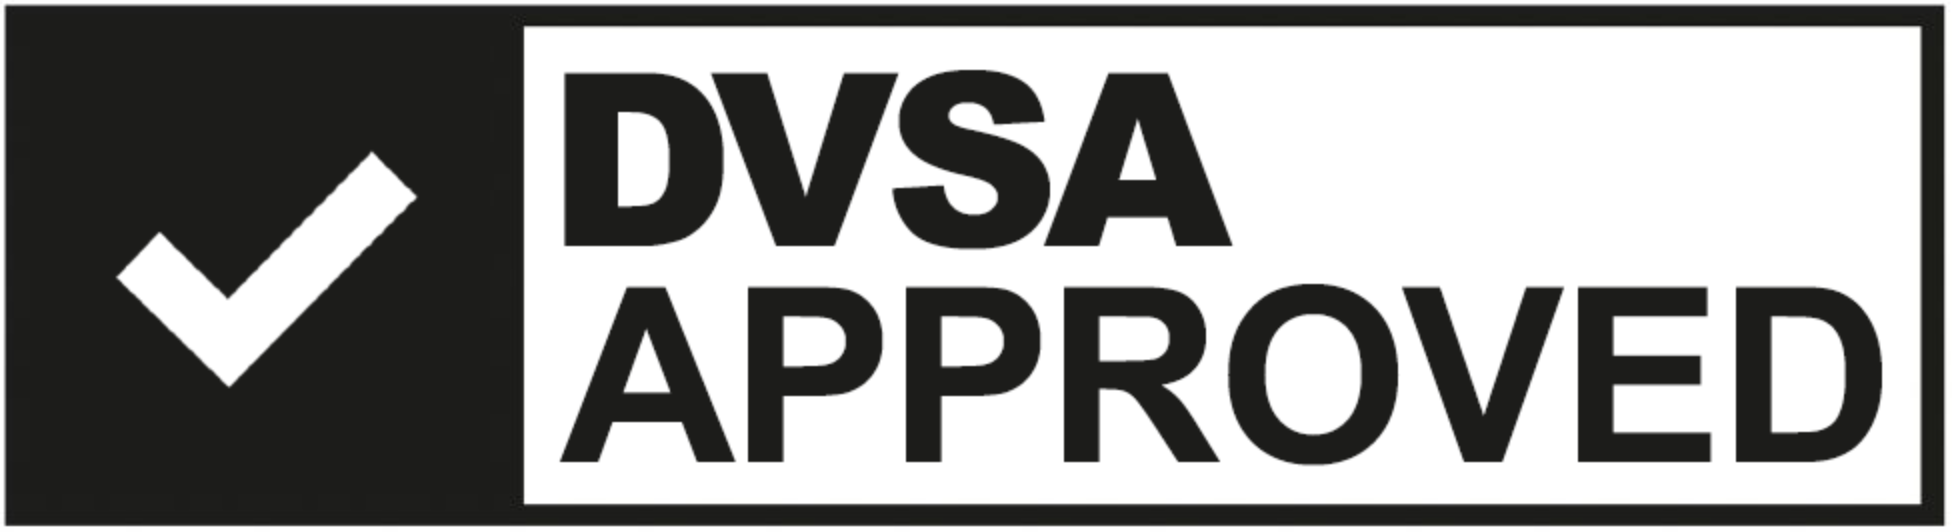 DVSA approved